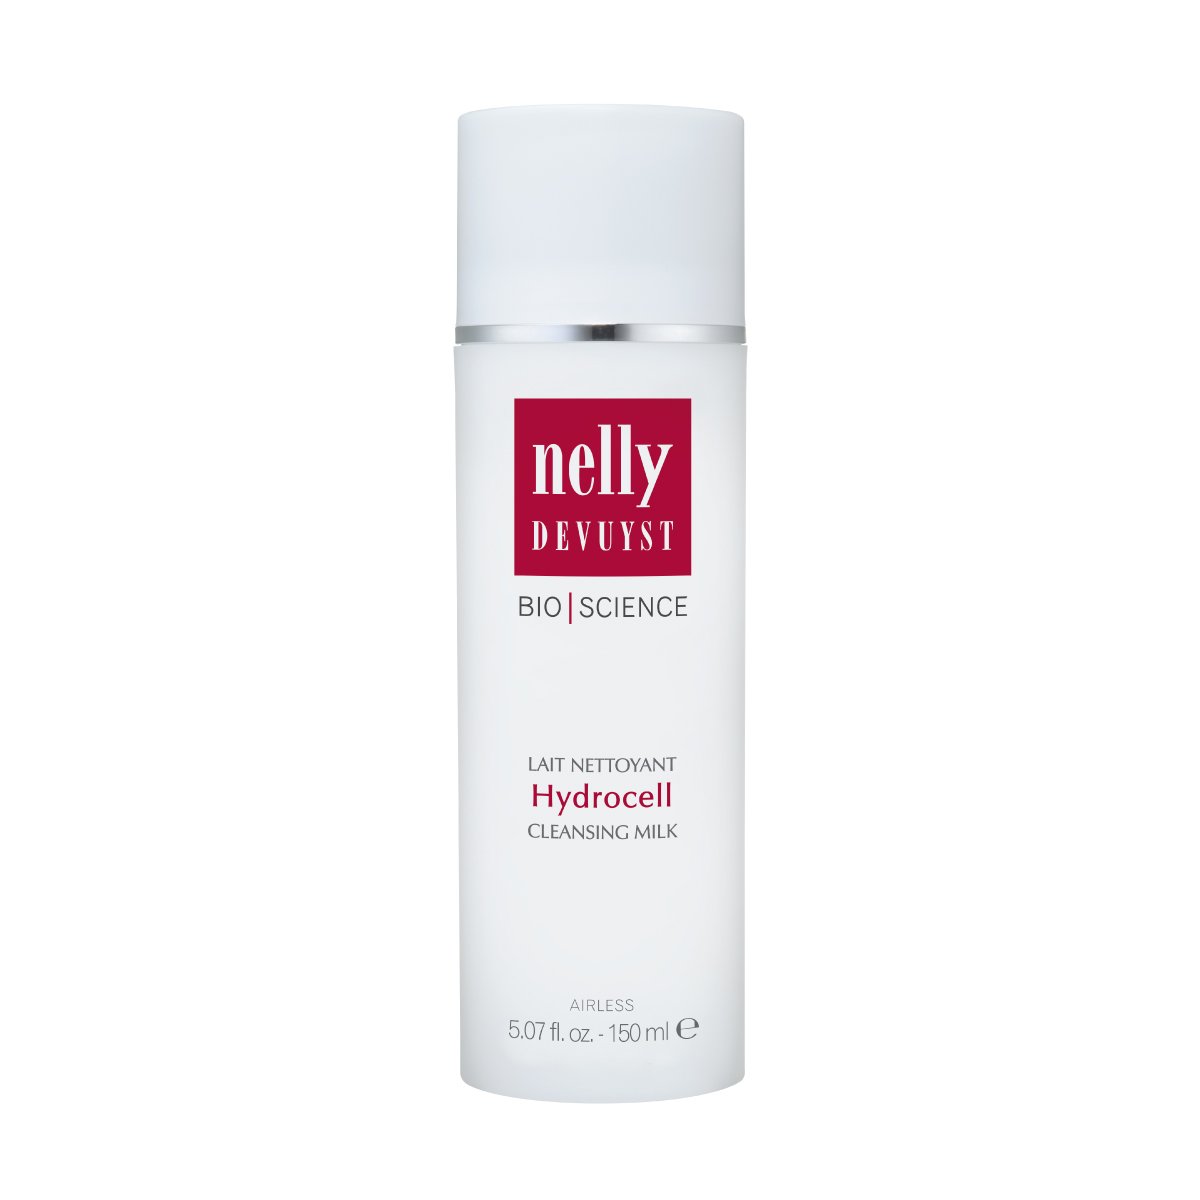 Lait Nettoyant Hydrocell Bioscience - Nelly Devuyst